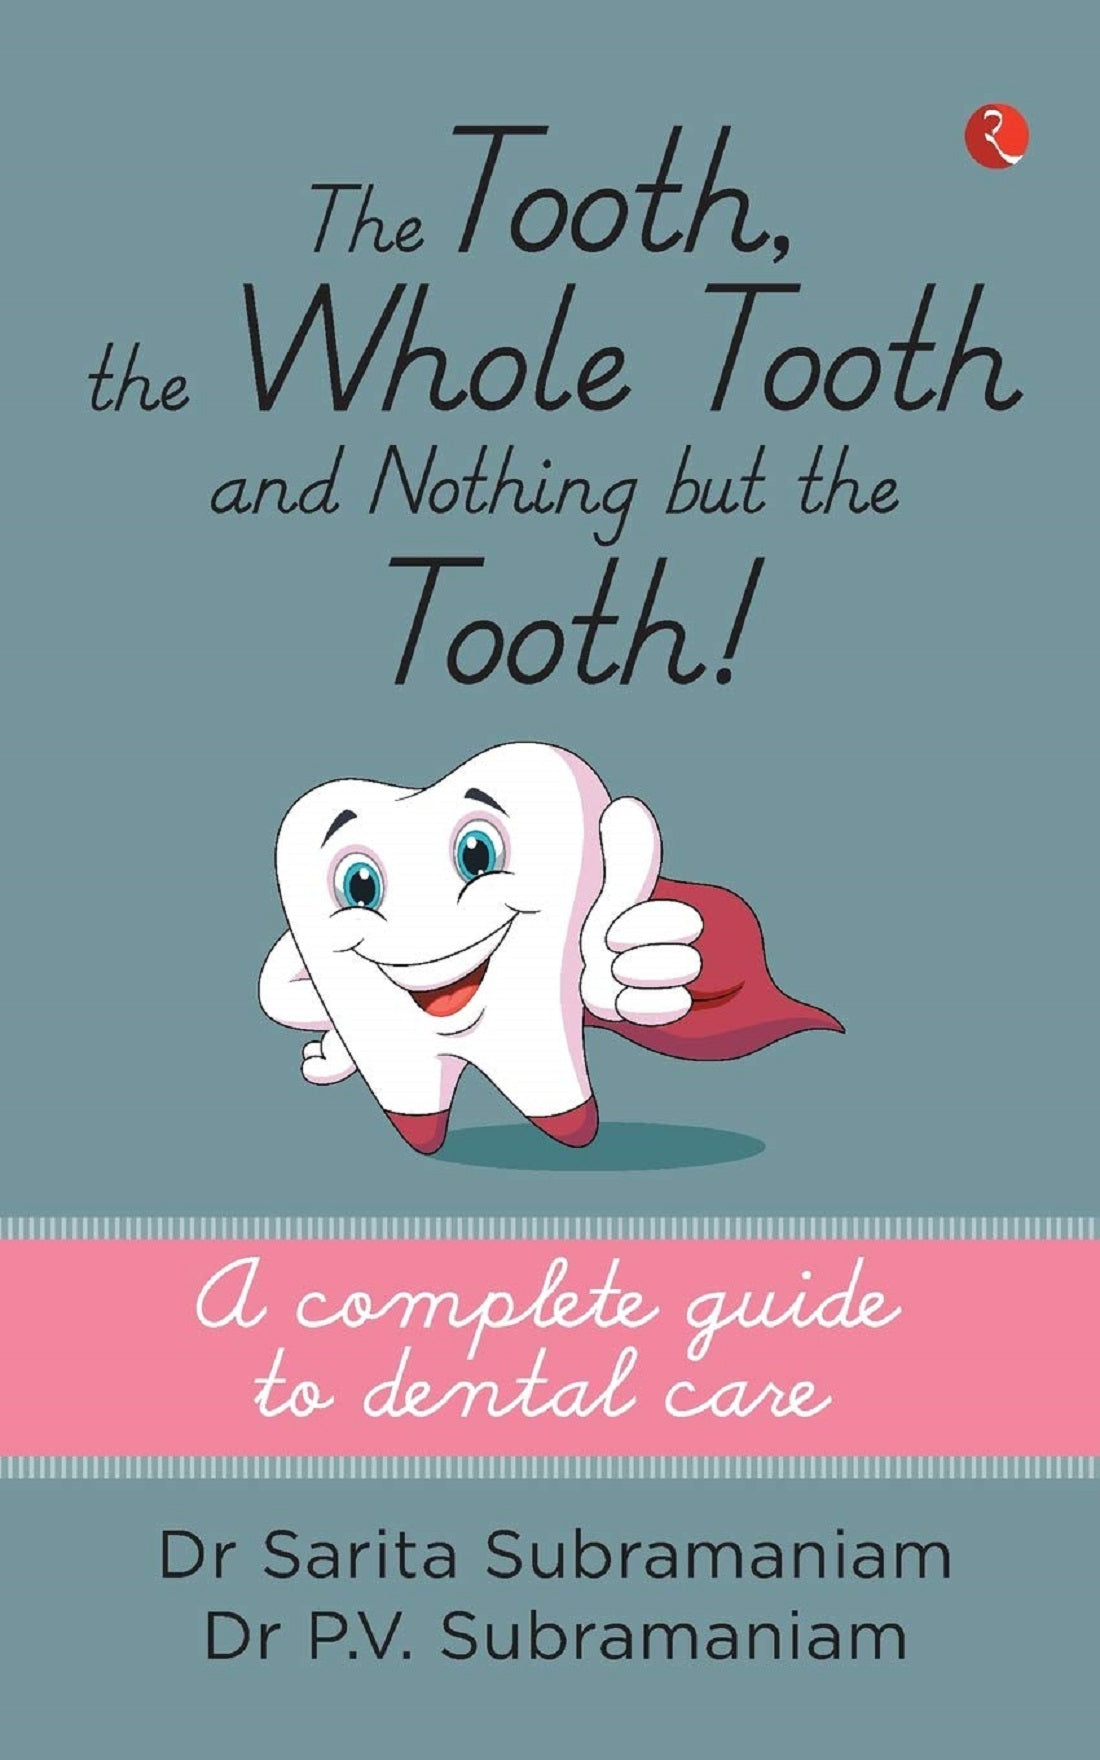 THE TOOTH, THE WHOLE TOOTH AND NOTHING BUT THE TOOTH